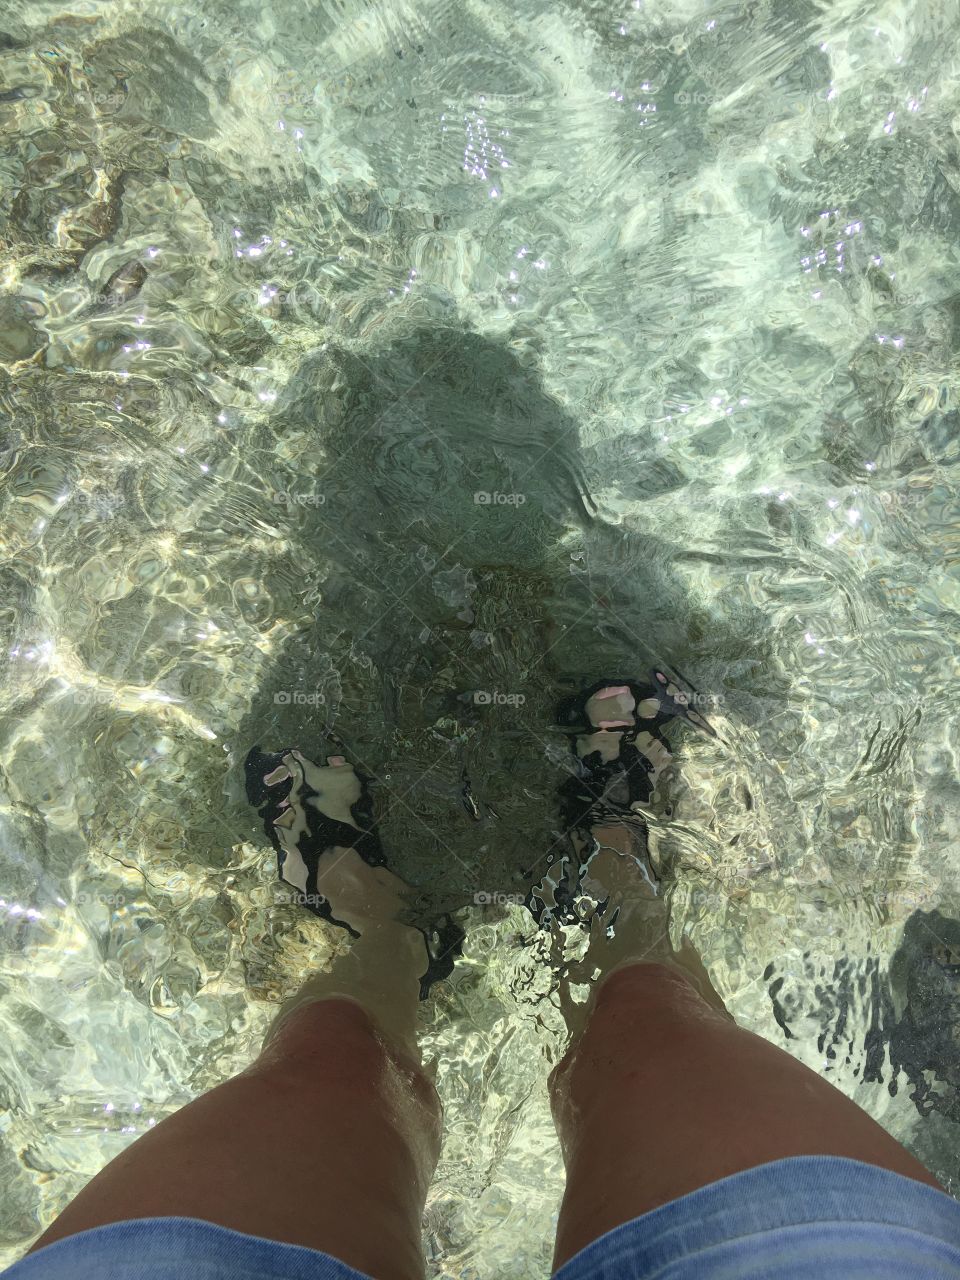 Toes in the water 